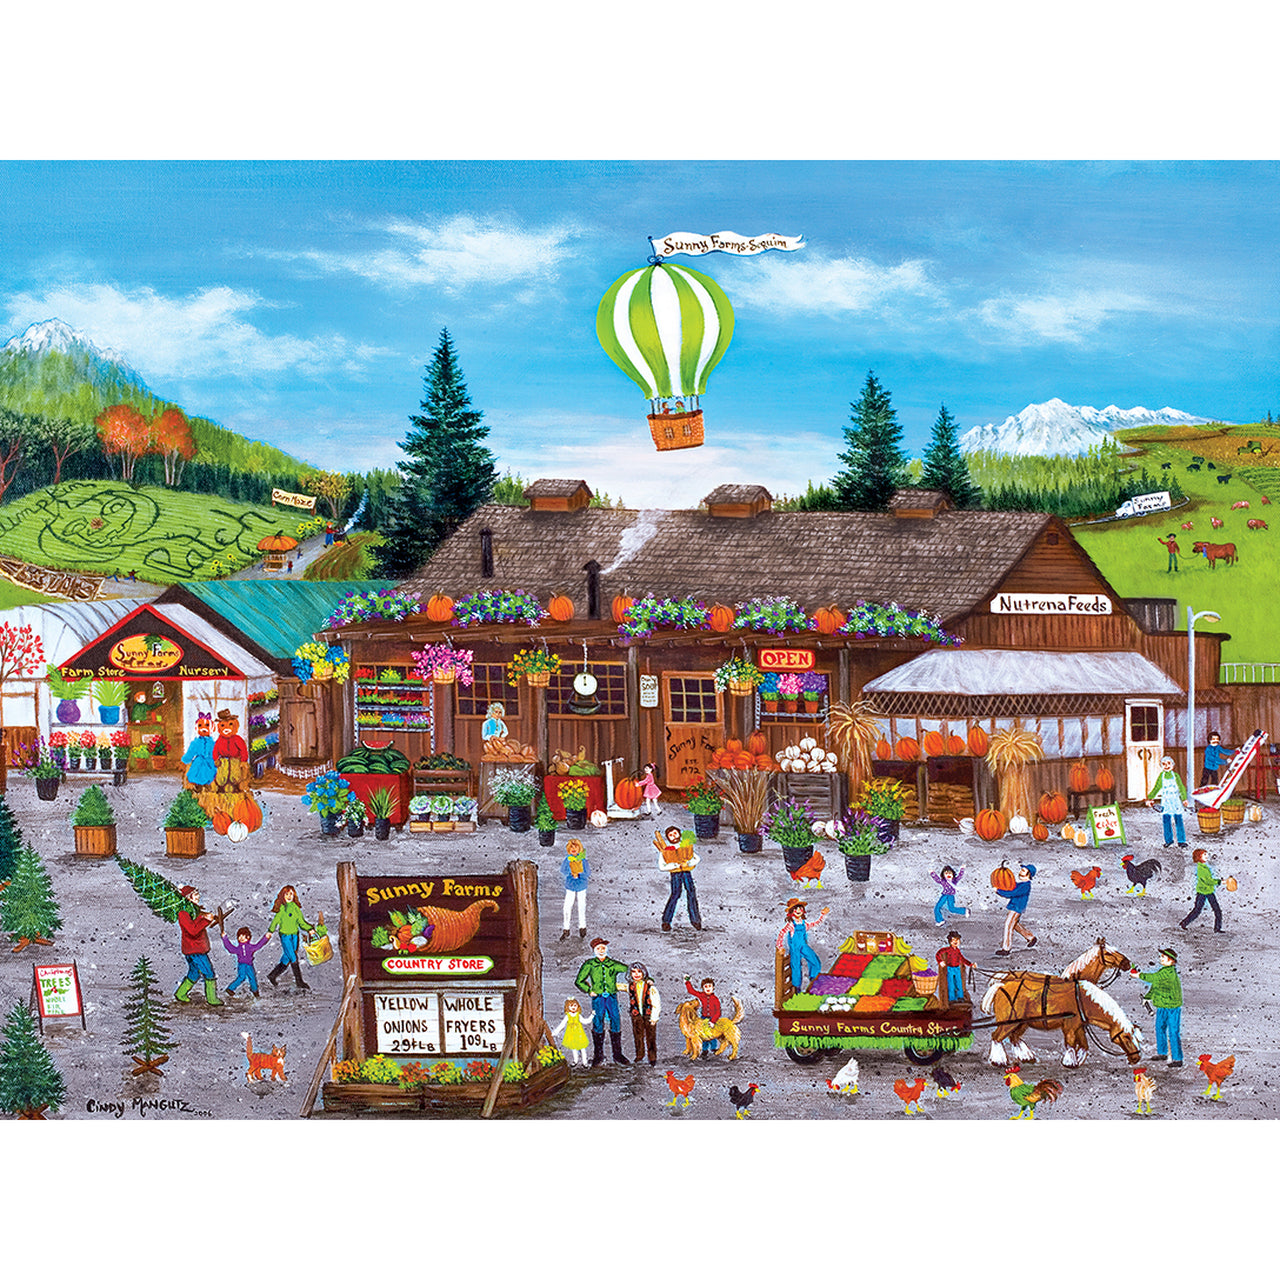 Homegrown Sunny Farms - 750 Piece Linen Jigsaw Puzzle by Masterpieces